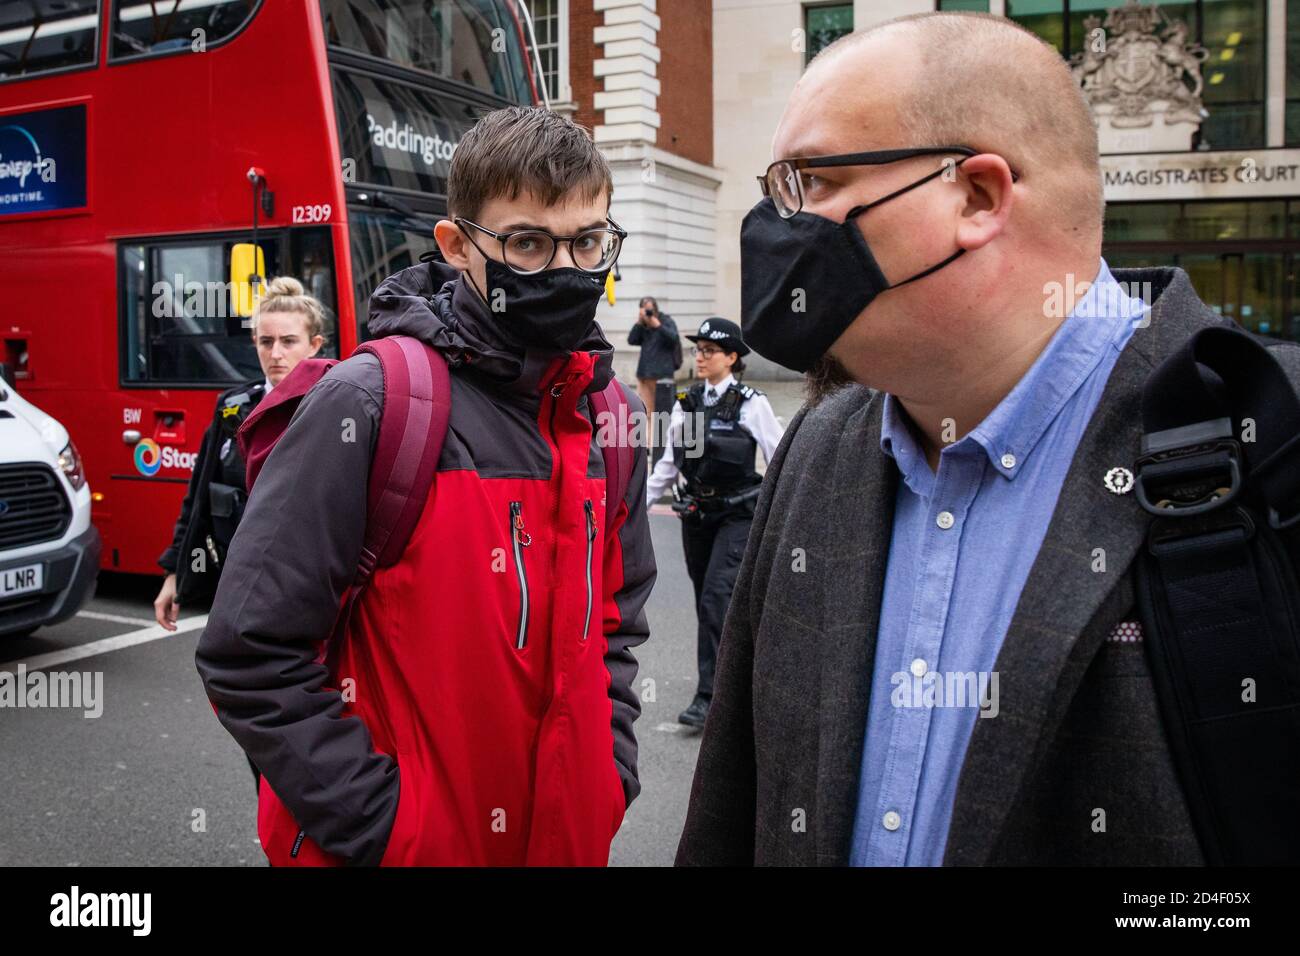 Benjamin Clark (left), 18, of Wilton Crescent, Hertford, and his father, Andrew Clark (right), exit Westminster Magistrates' Court in London, where Benjamin was charged with criminal damage to the Sir Winston Churchill statue in Parliament Square on September 10, the final day of ten days of Extinction Rebellion protests in the capital and admitted causing £1,642.03 worth of damage to the statue and spraying the word 'racist' in chalk paint, but denied causing all the damage to the statue done on the day. Deputy Chief Magistrate Tan Ikram handed down a £200 fine and ordered Clark to pay £1,200 Stock Photo